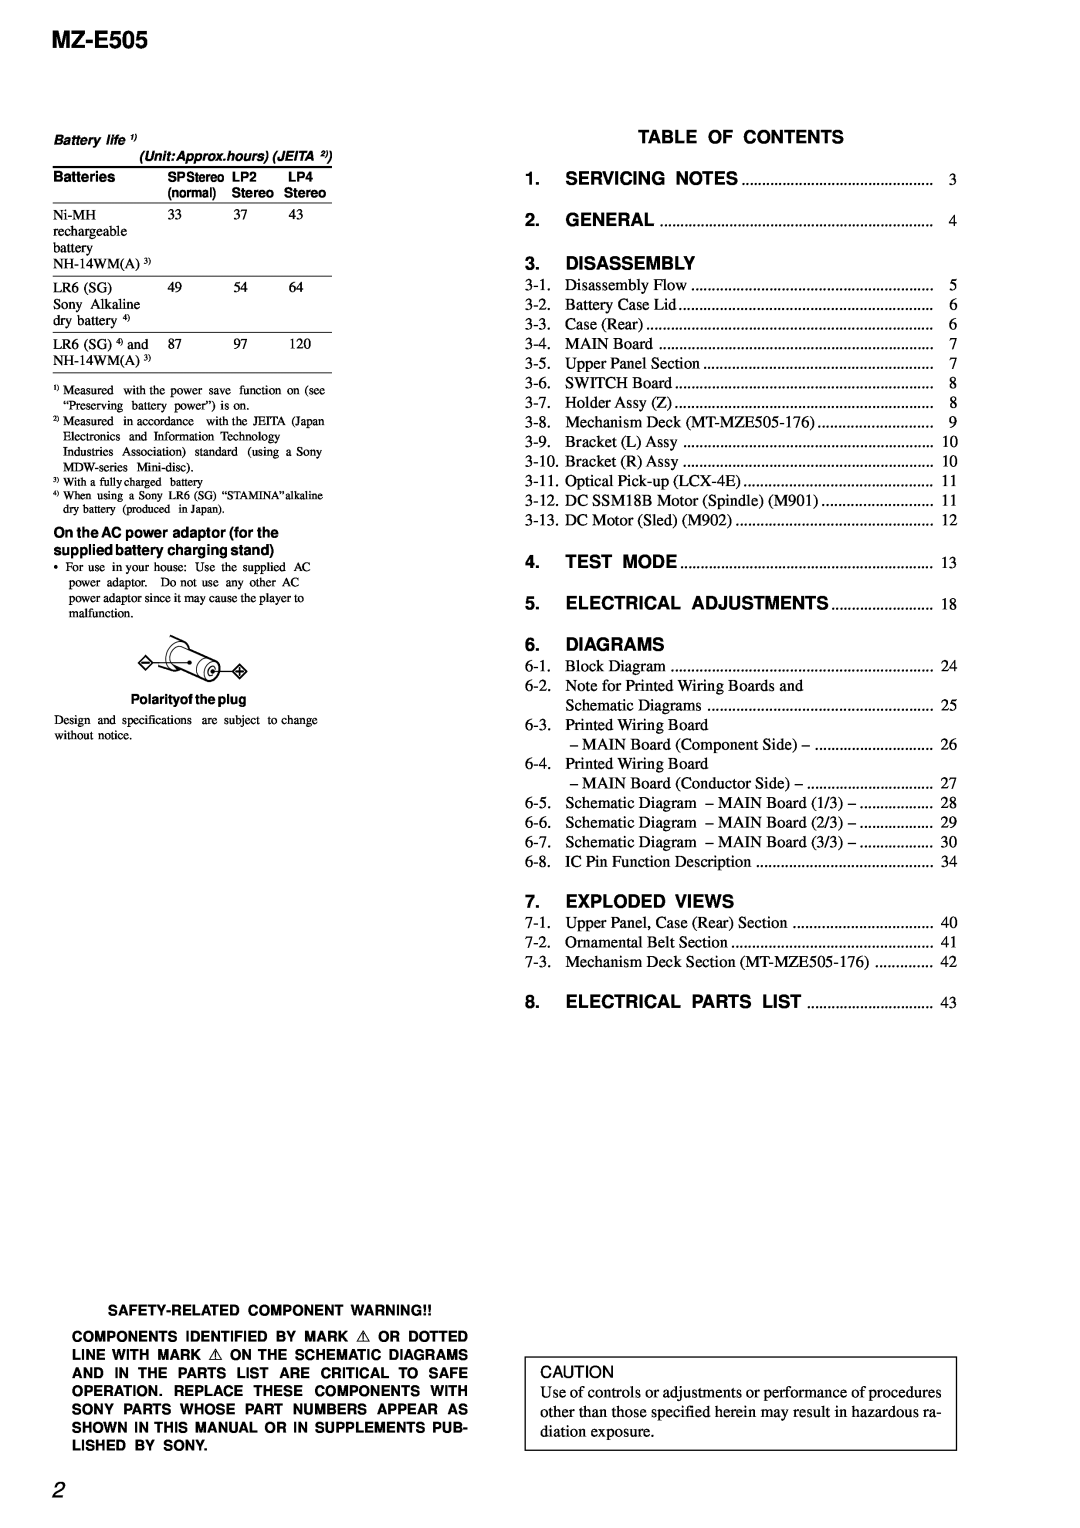 Sony MZ-E505 service manual Table Of Contents, Disassembly, Diagrams, Exploded Views, Servicing Notes, General 